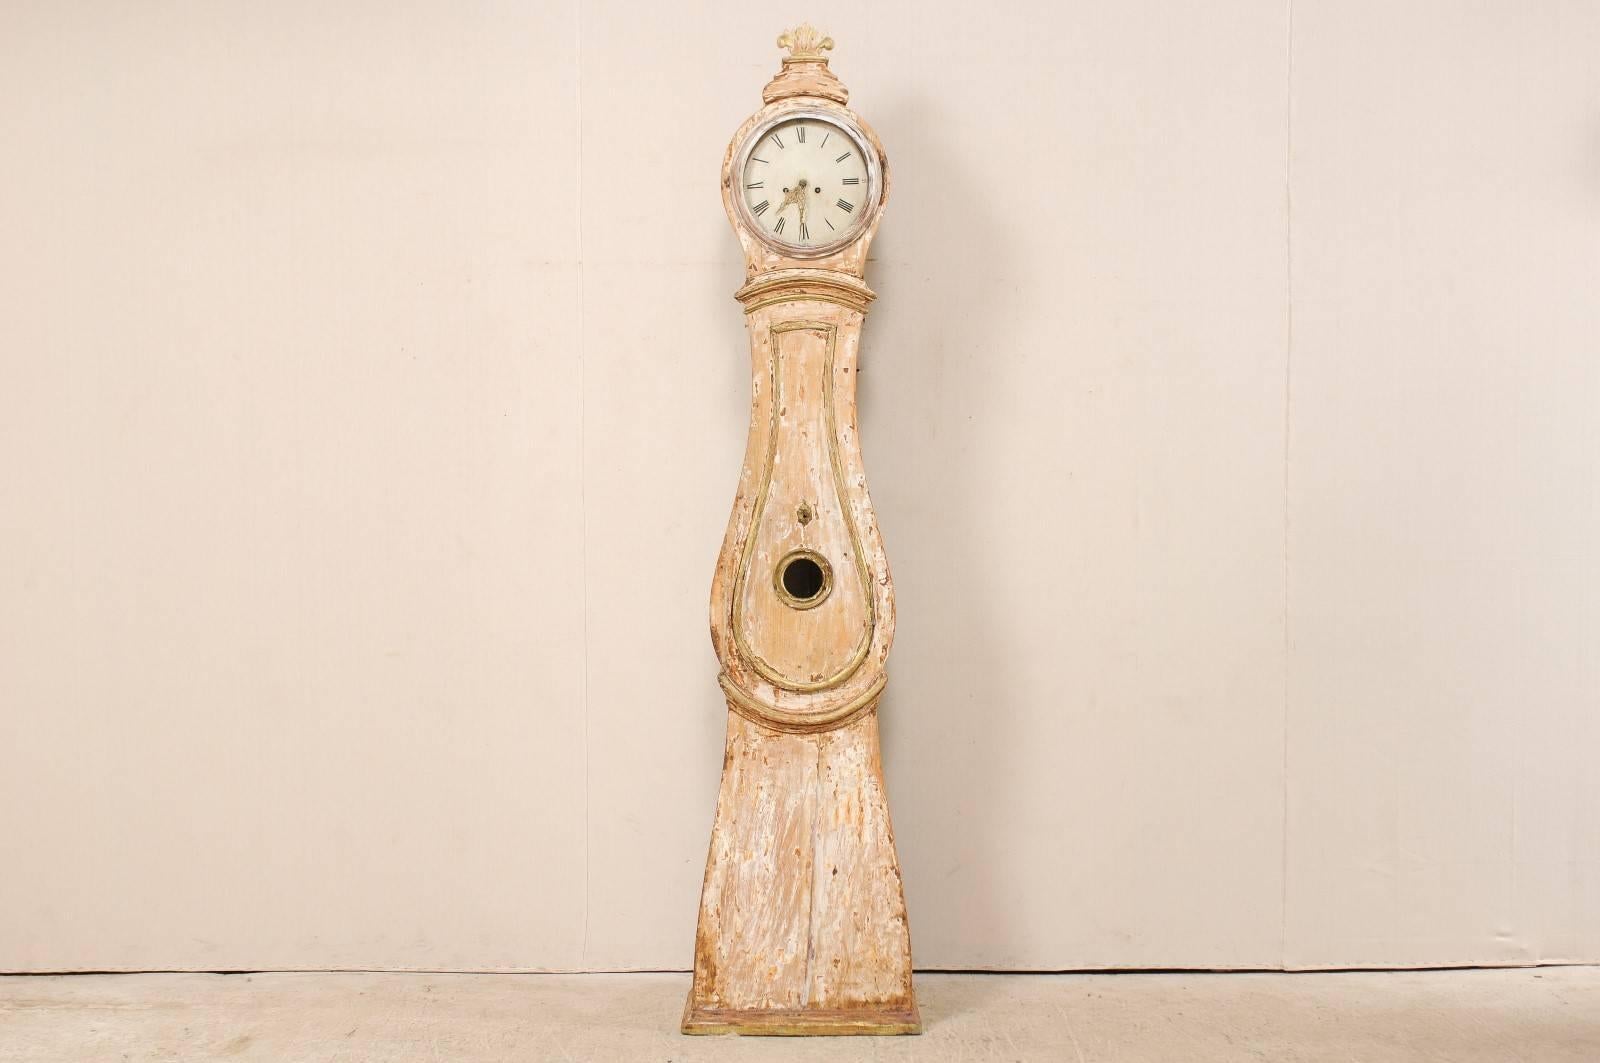 A 19th century Swedish carved wood grandfather clock. This tall antique clock from northern Sweden features a stacked and raised adorn fanned leaves at it's top, and accented with trim molding about the neck and waist. The belly has inset trim,